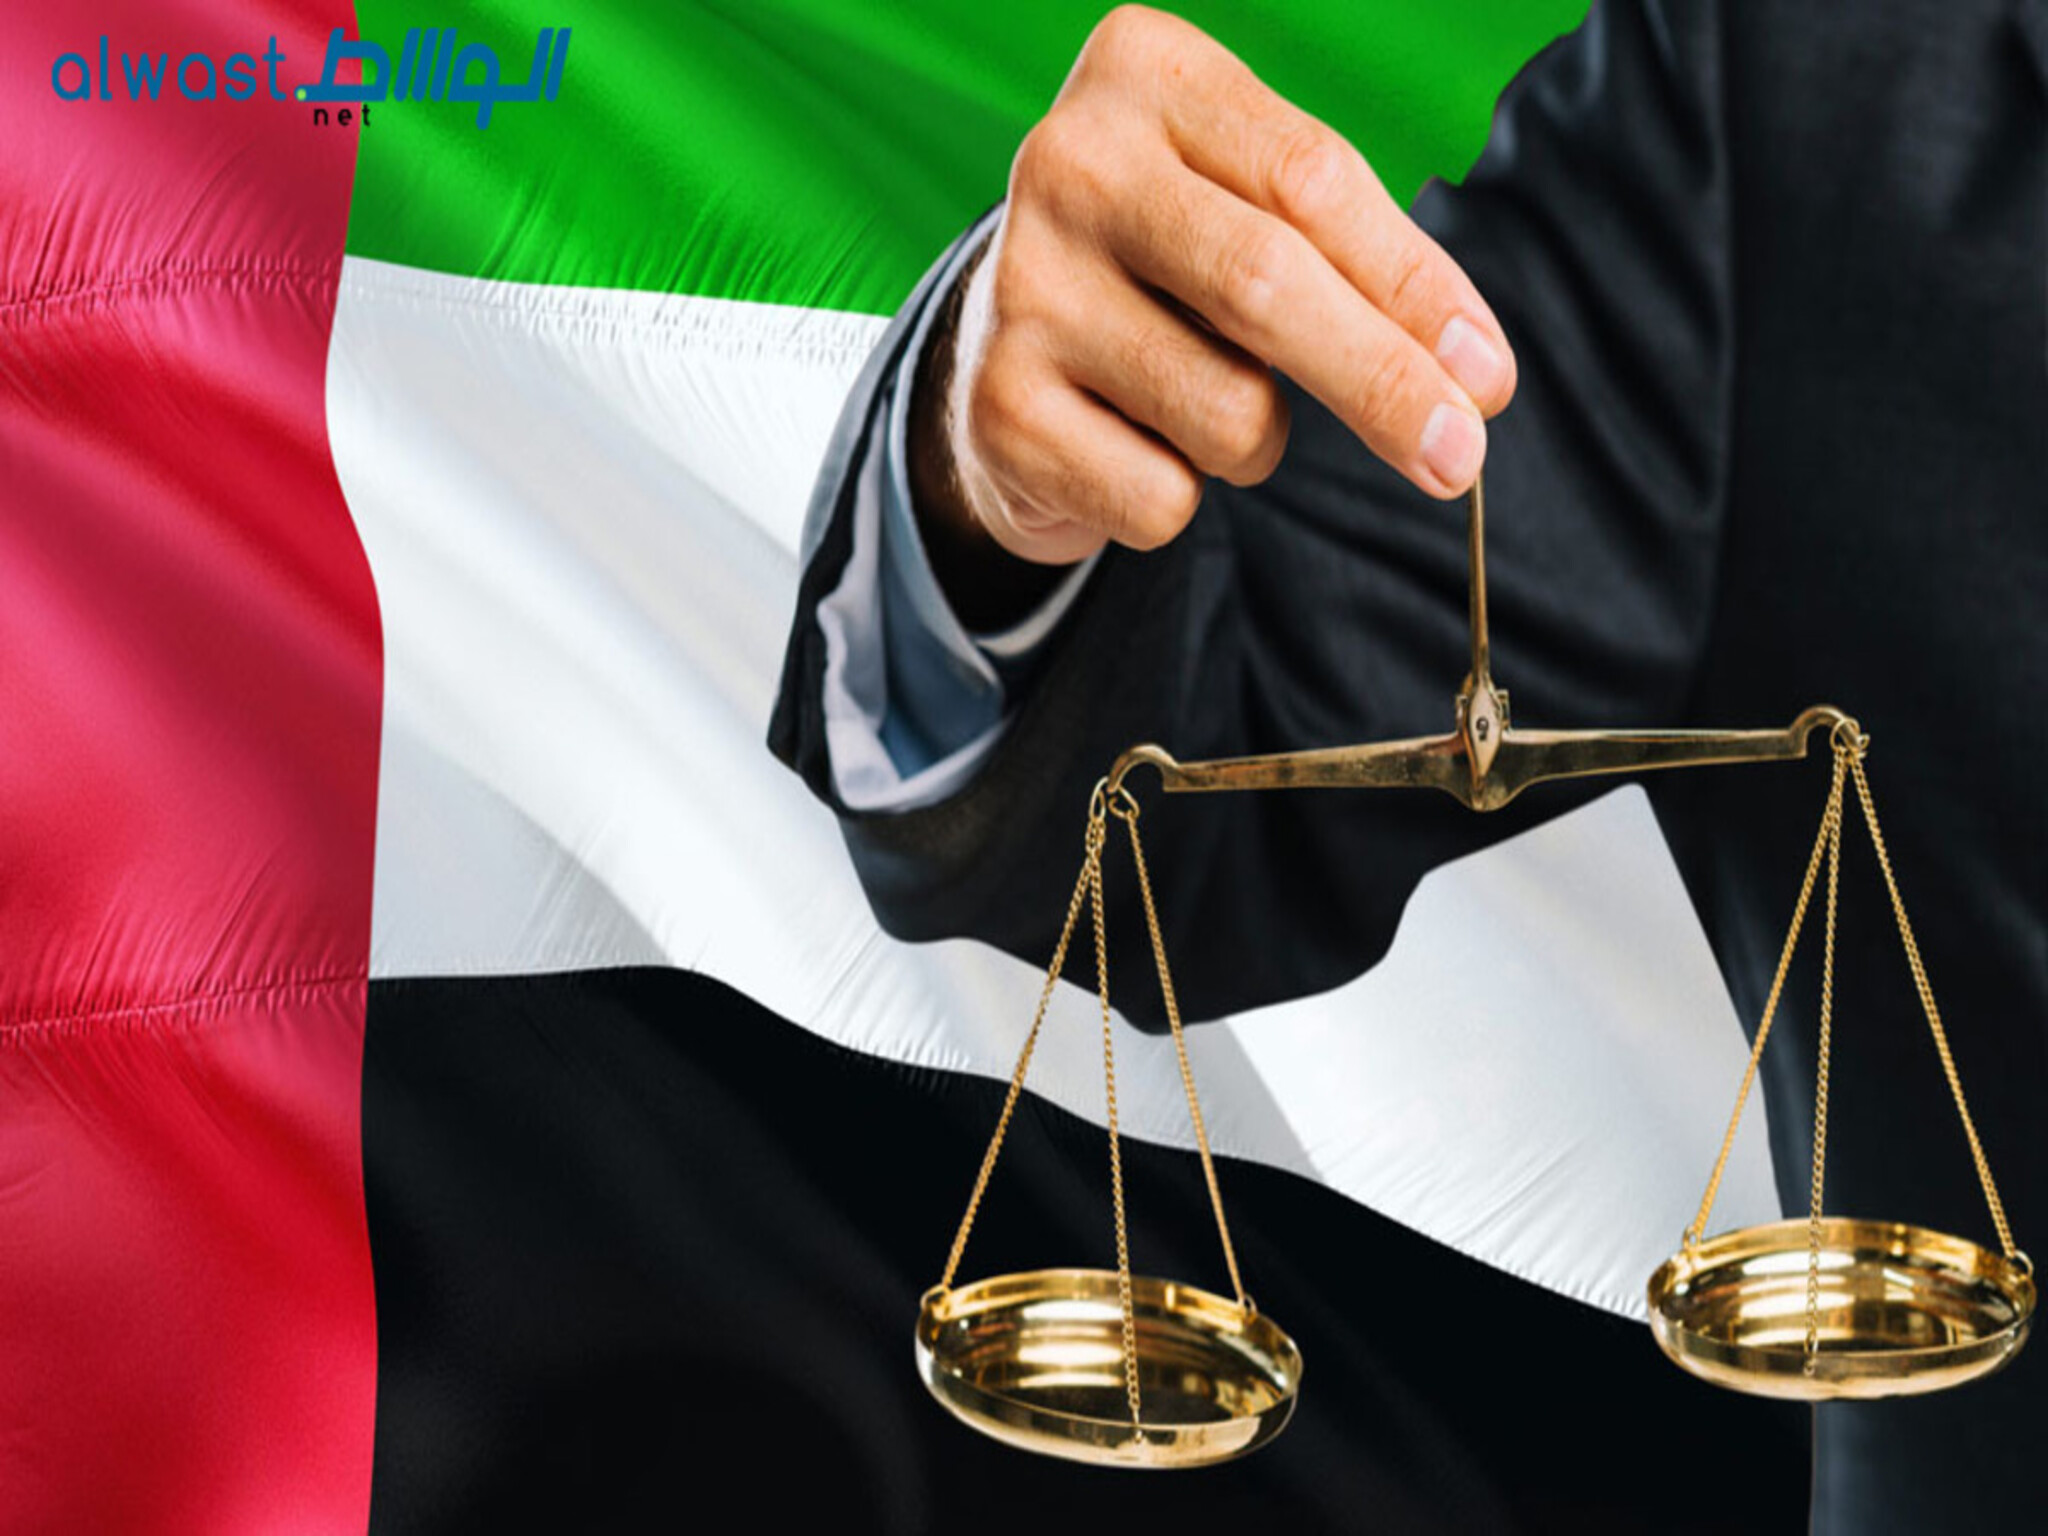 UAE court fined Two brothers DH50,000 for insulting a person of determination